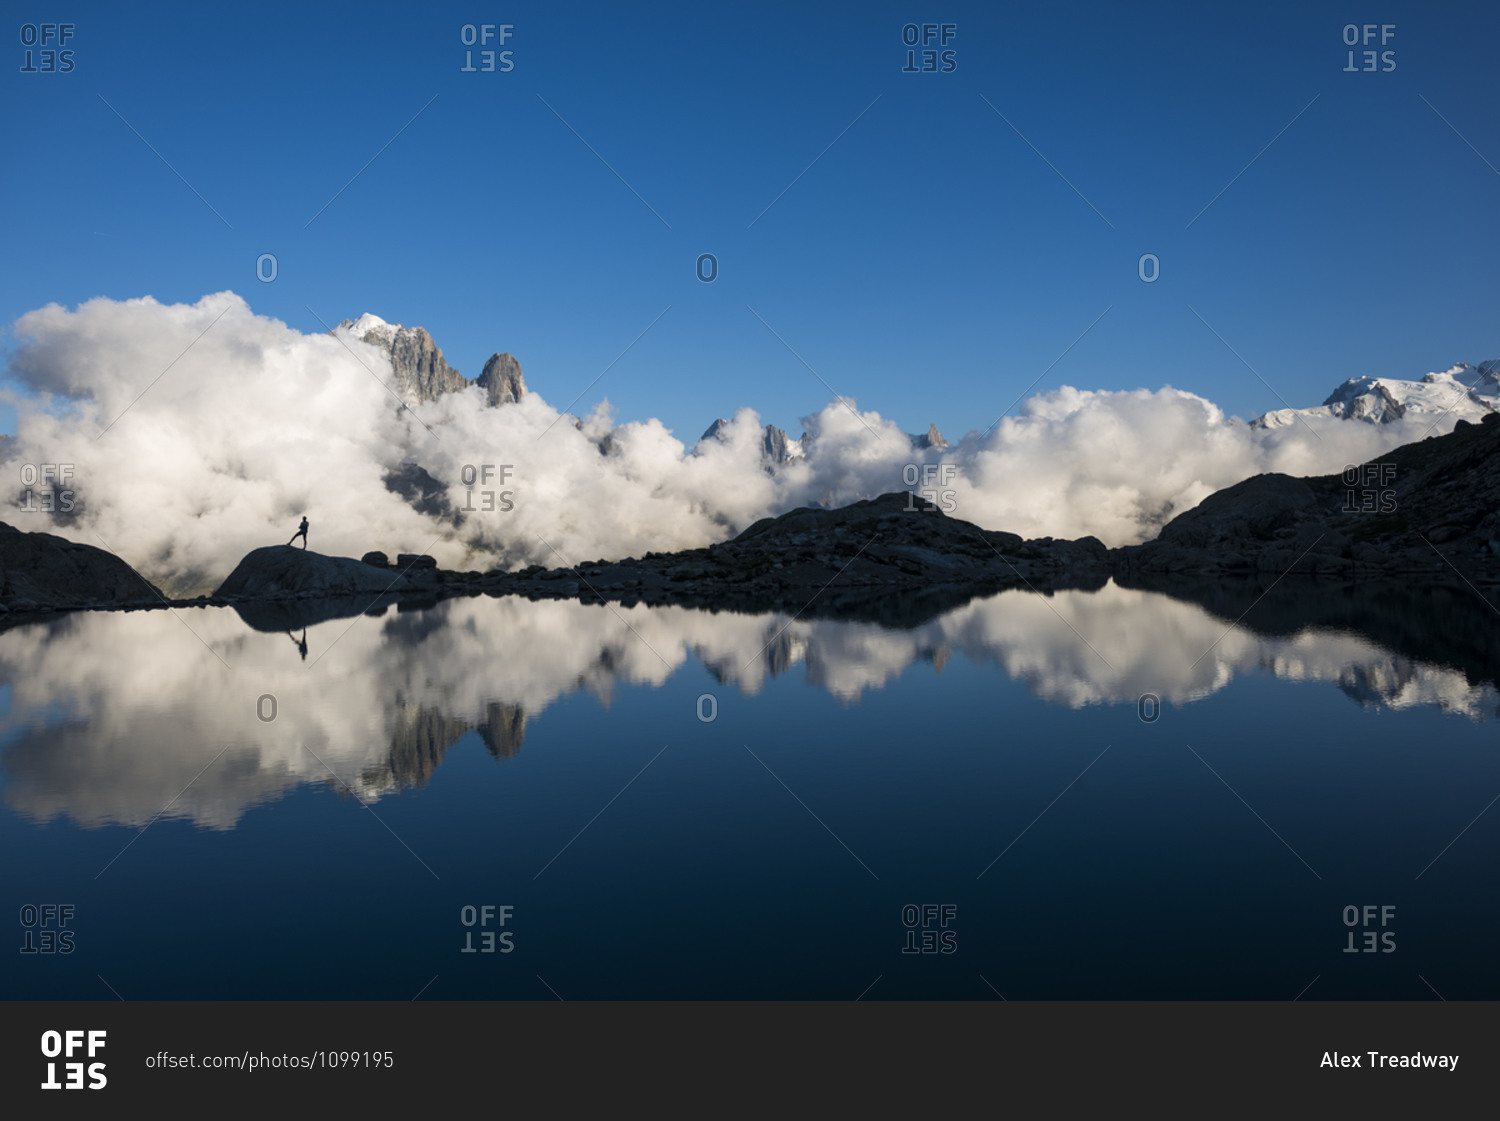 A hiker reflected in Lac Blanc on the Tour du Mont Blanc trekking route in the French Alps